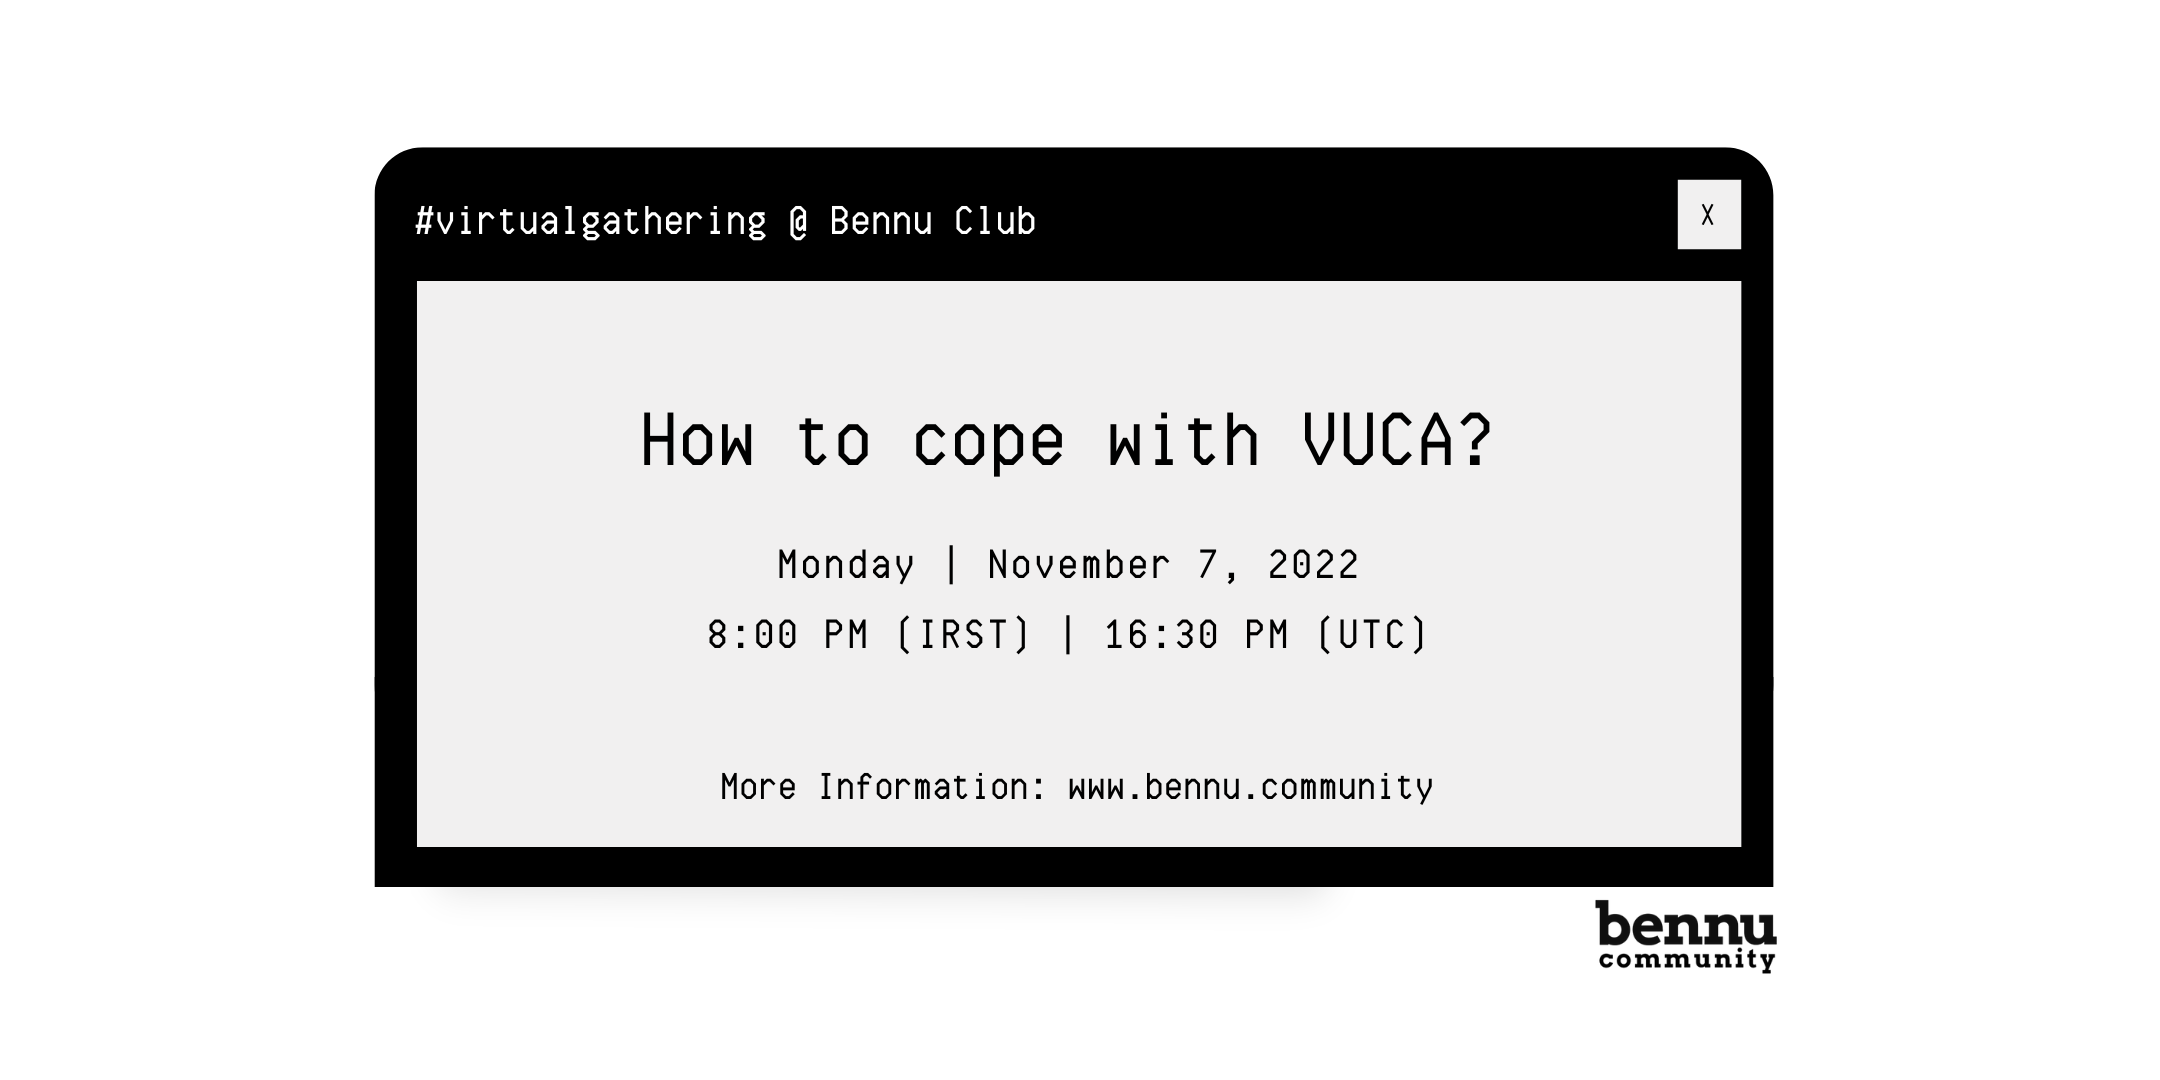 How to cope with VUCA Monday November 7, 2022